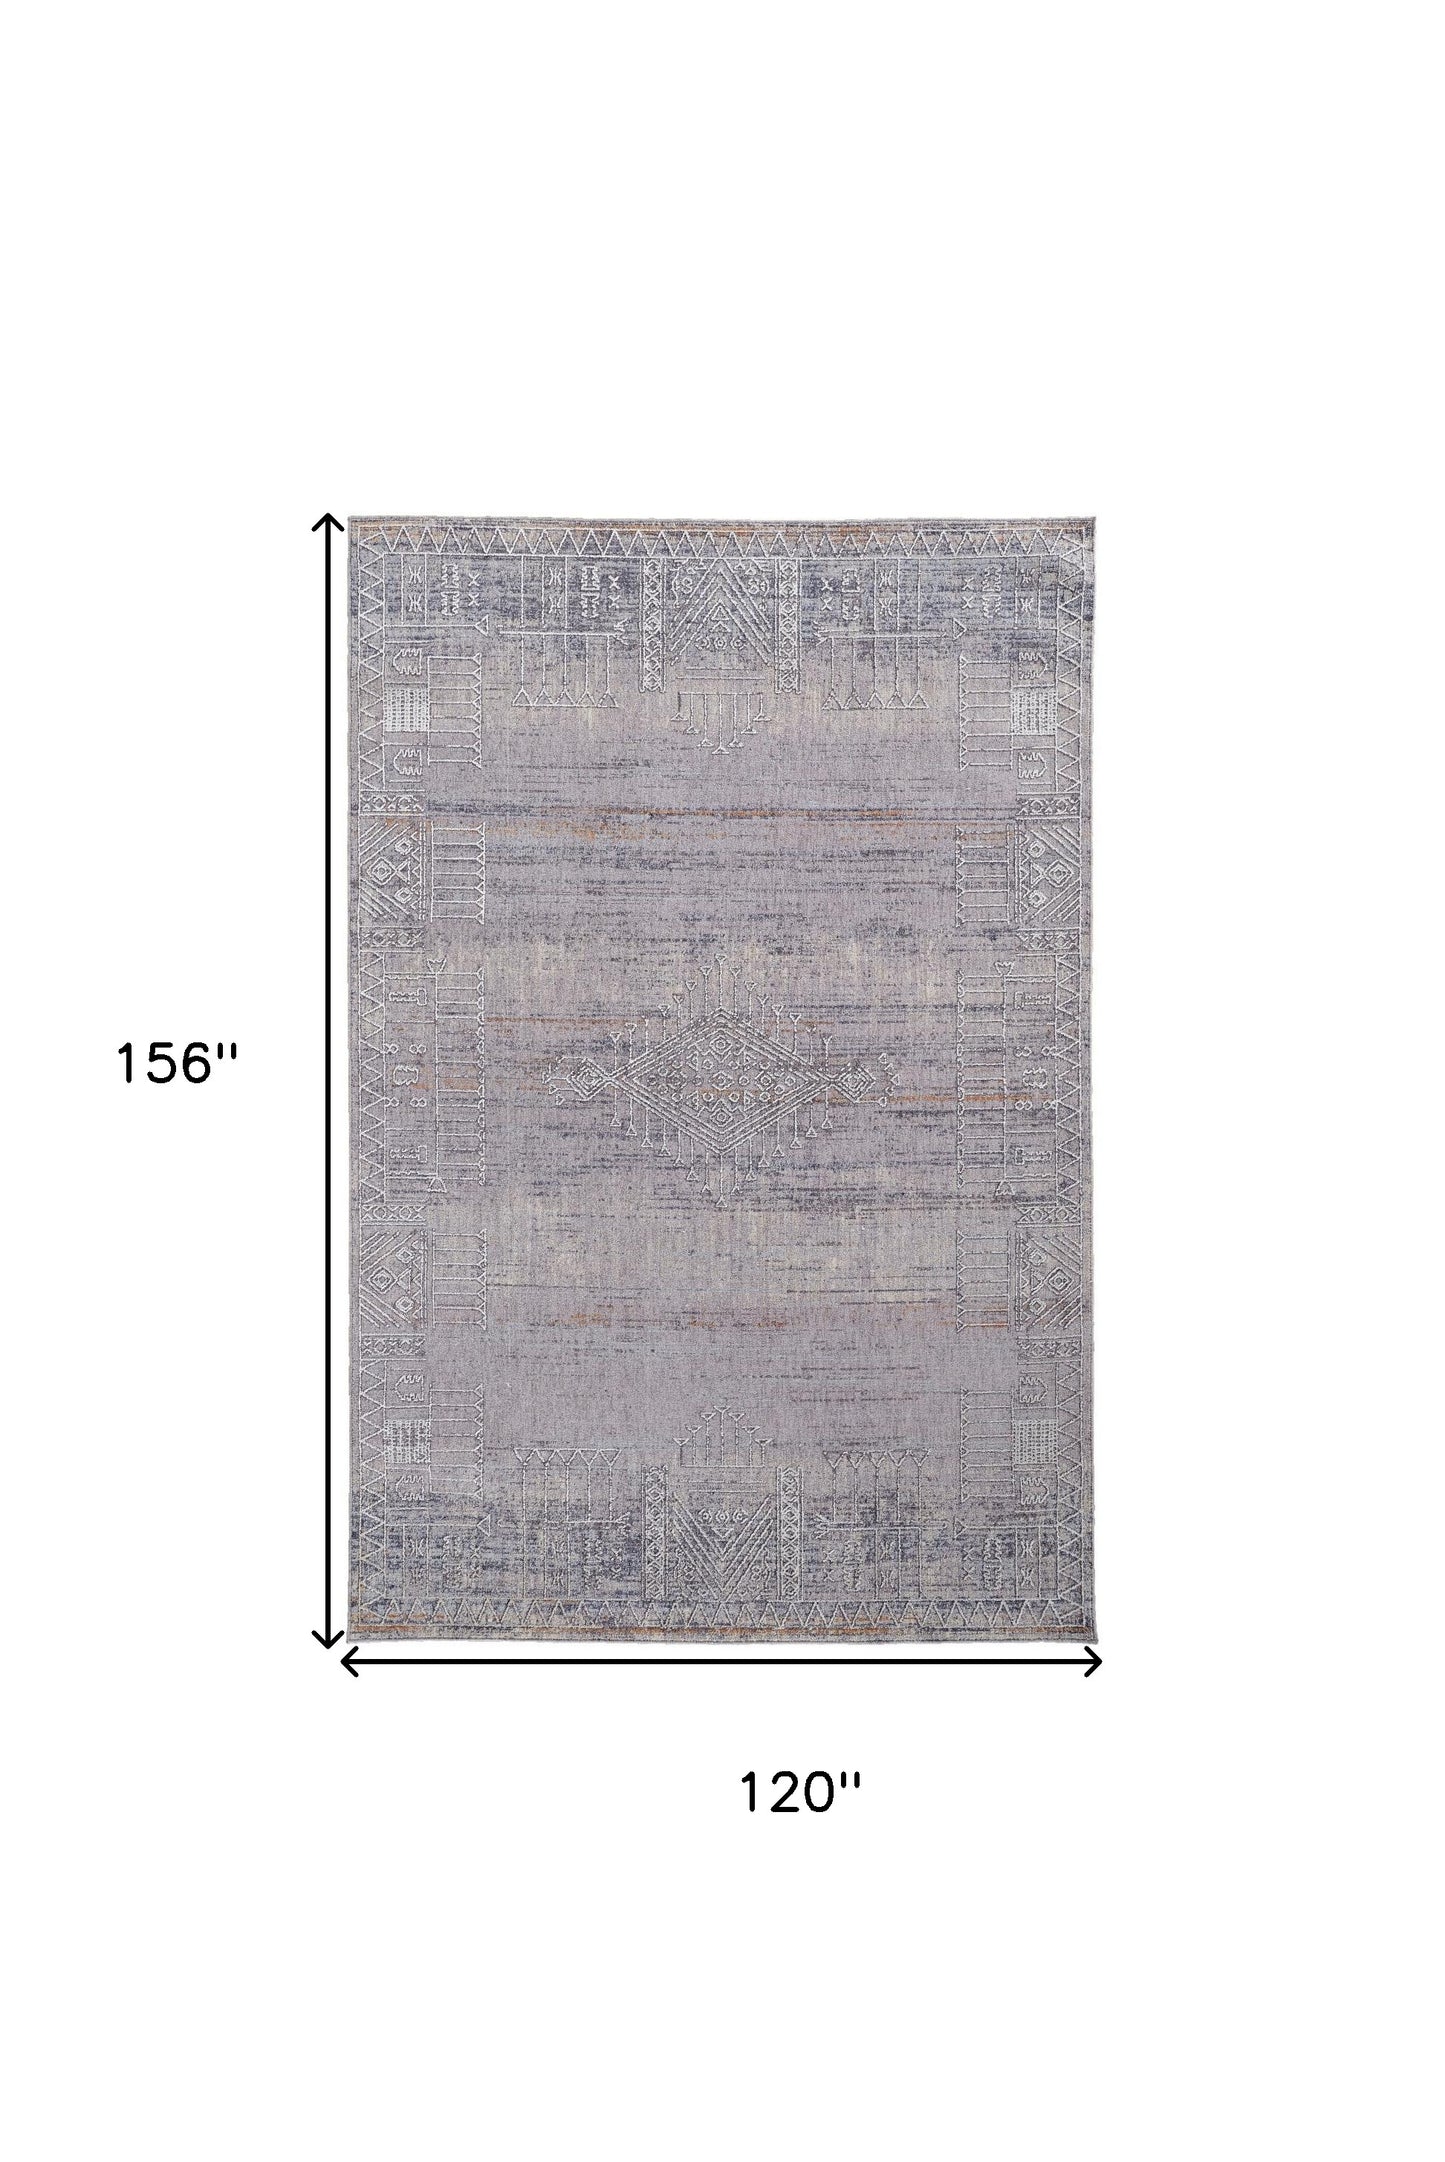 5' X 8' Gray Ivory And Orange Geometric Power Loom Distressed Stain Resistant Area Rug